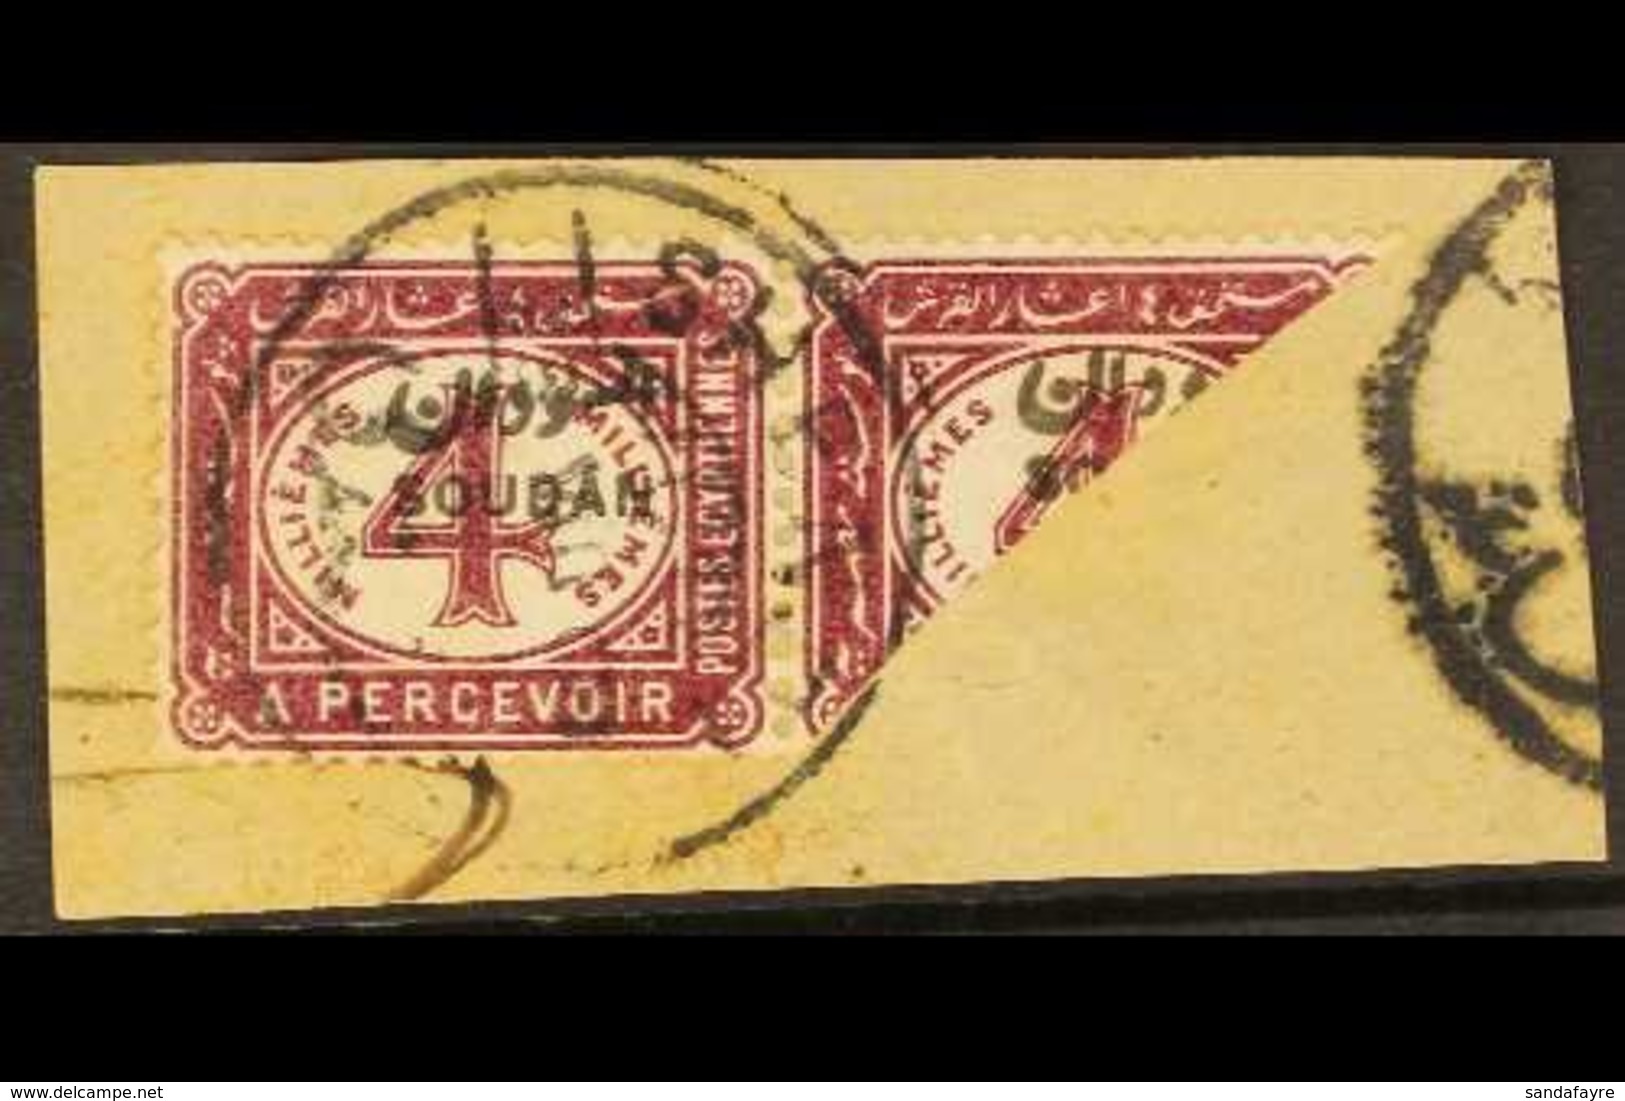 POSTAGE DUE 1897 4m Maroon BISECTED On Piece, SG D2a, Tied Shendi Cds Of 28/11/01. Very Scarce. For More Images, Please  - Sudan (...-1951)